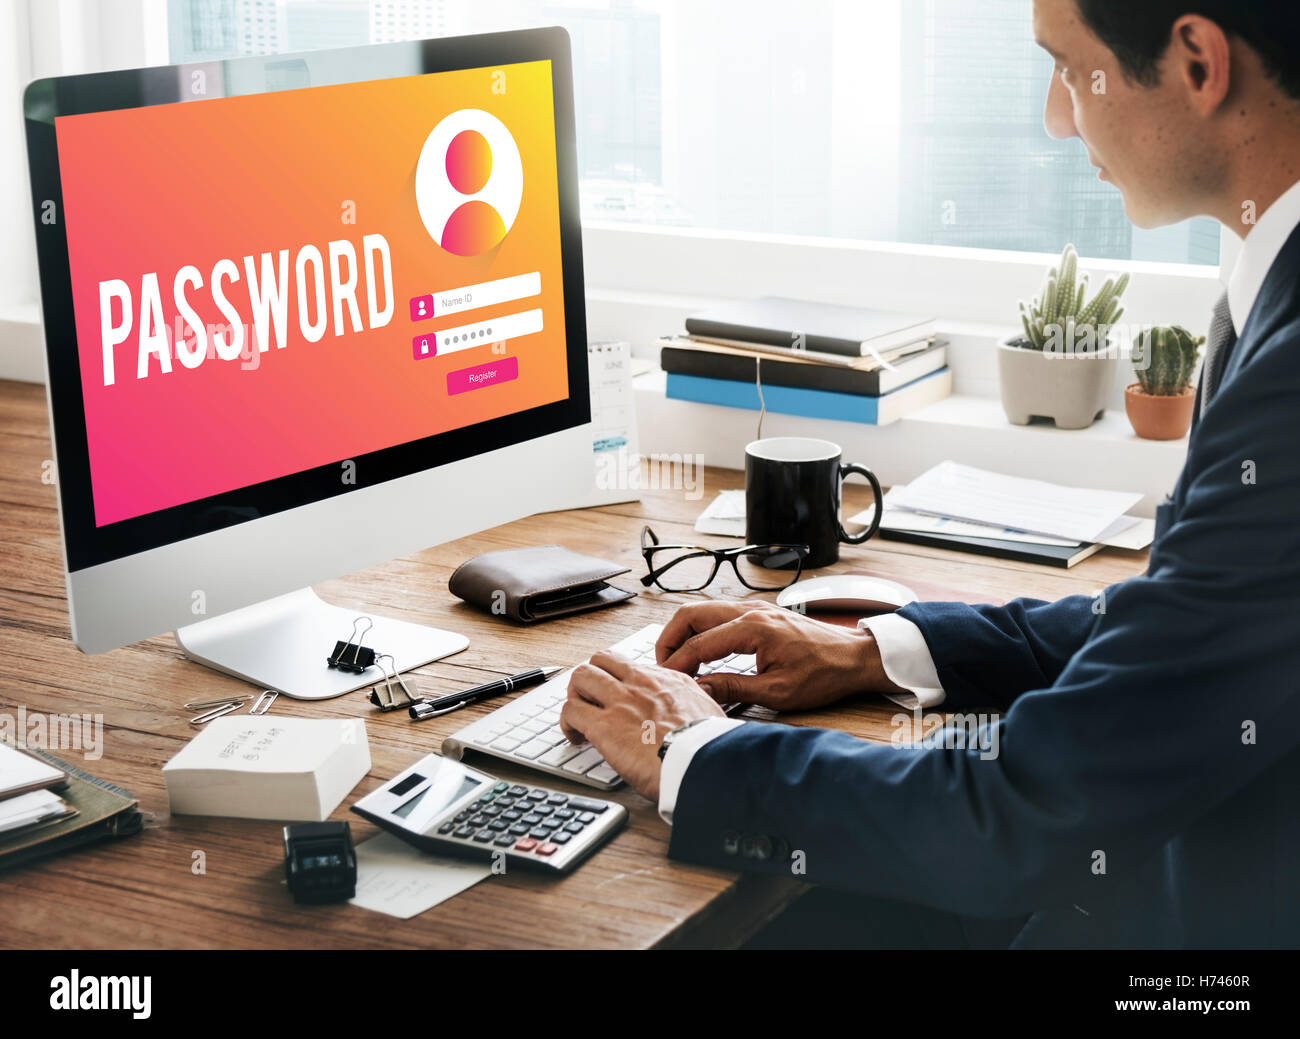 Password Sign In User Privacy Concept Stock Photo